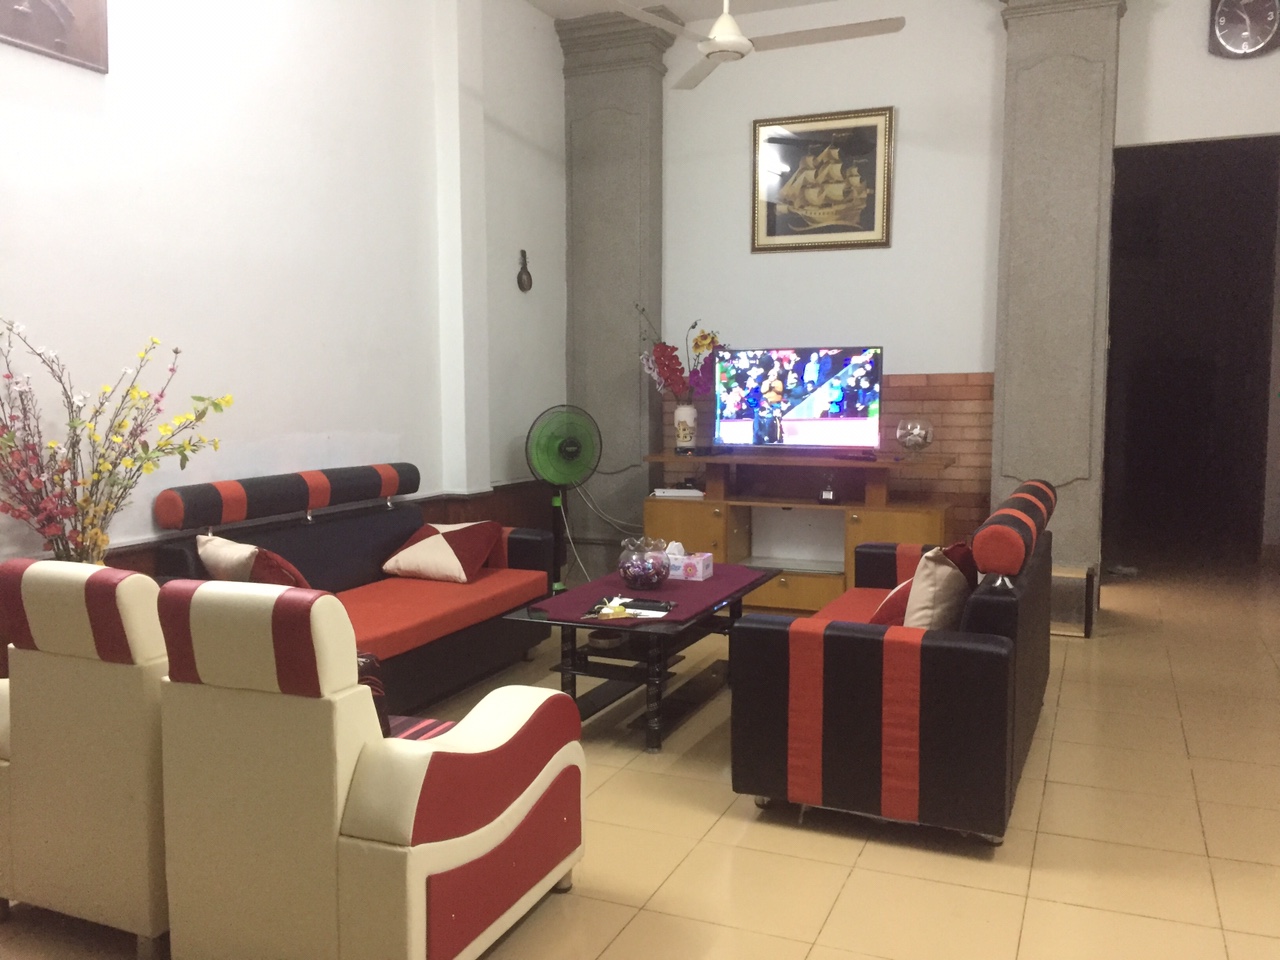 House for rent in Thao Dien Ward, District 2 - 3 bedrooms